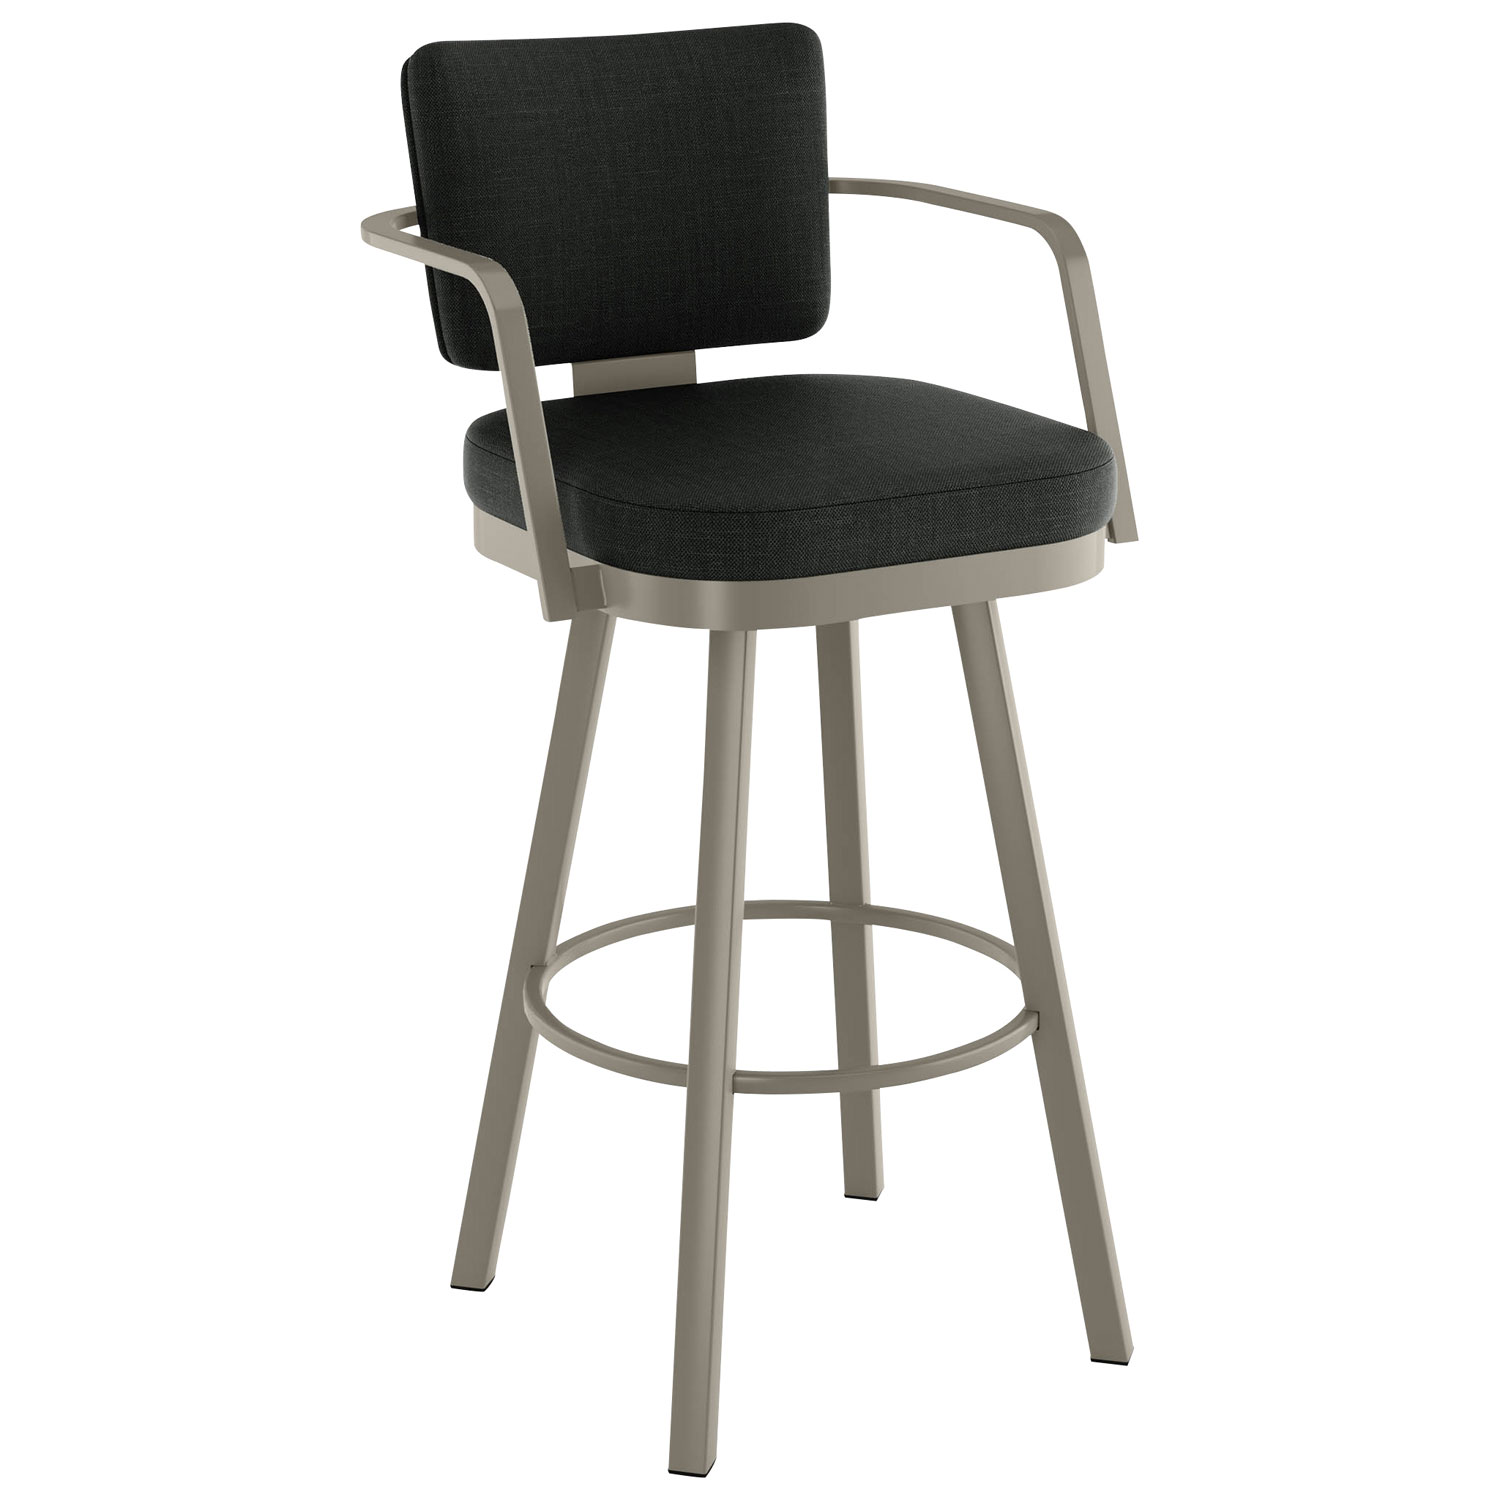 Thea Rustic Country Bar Height Barstool - Black/Grey